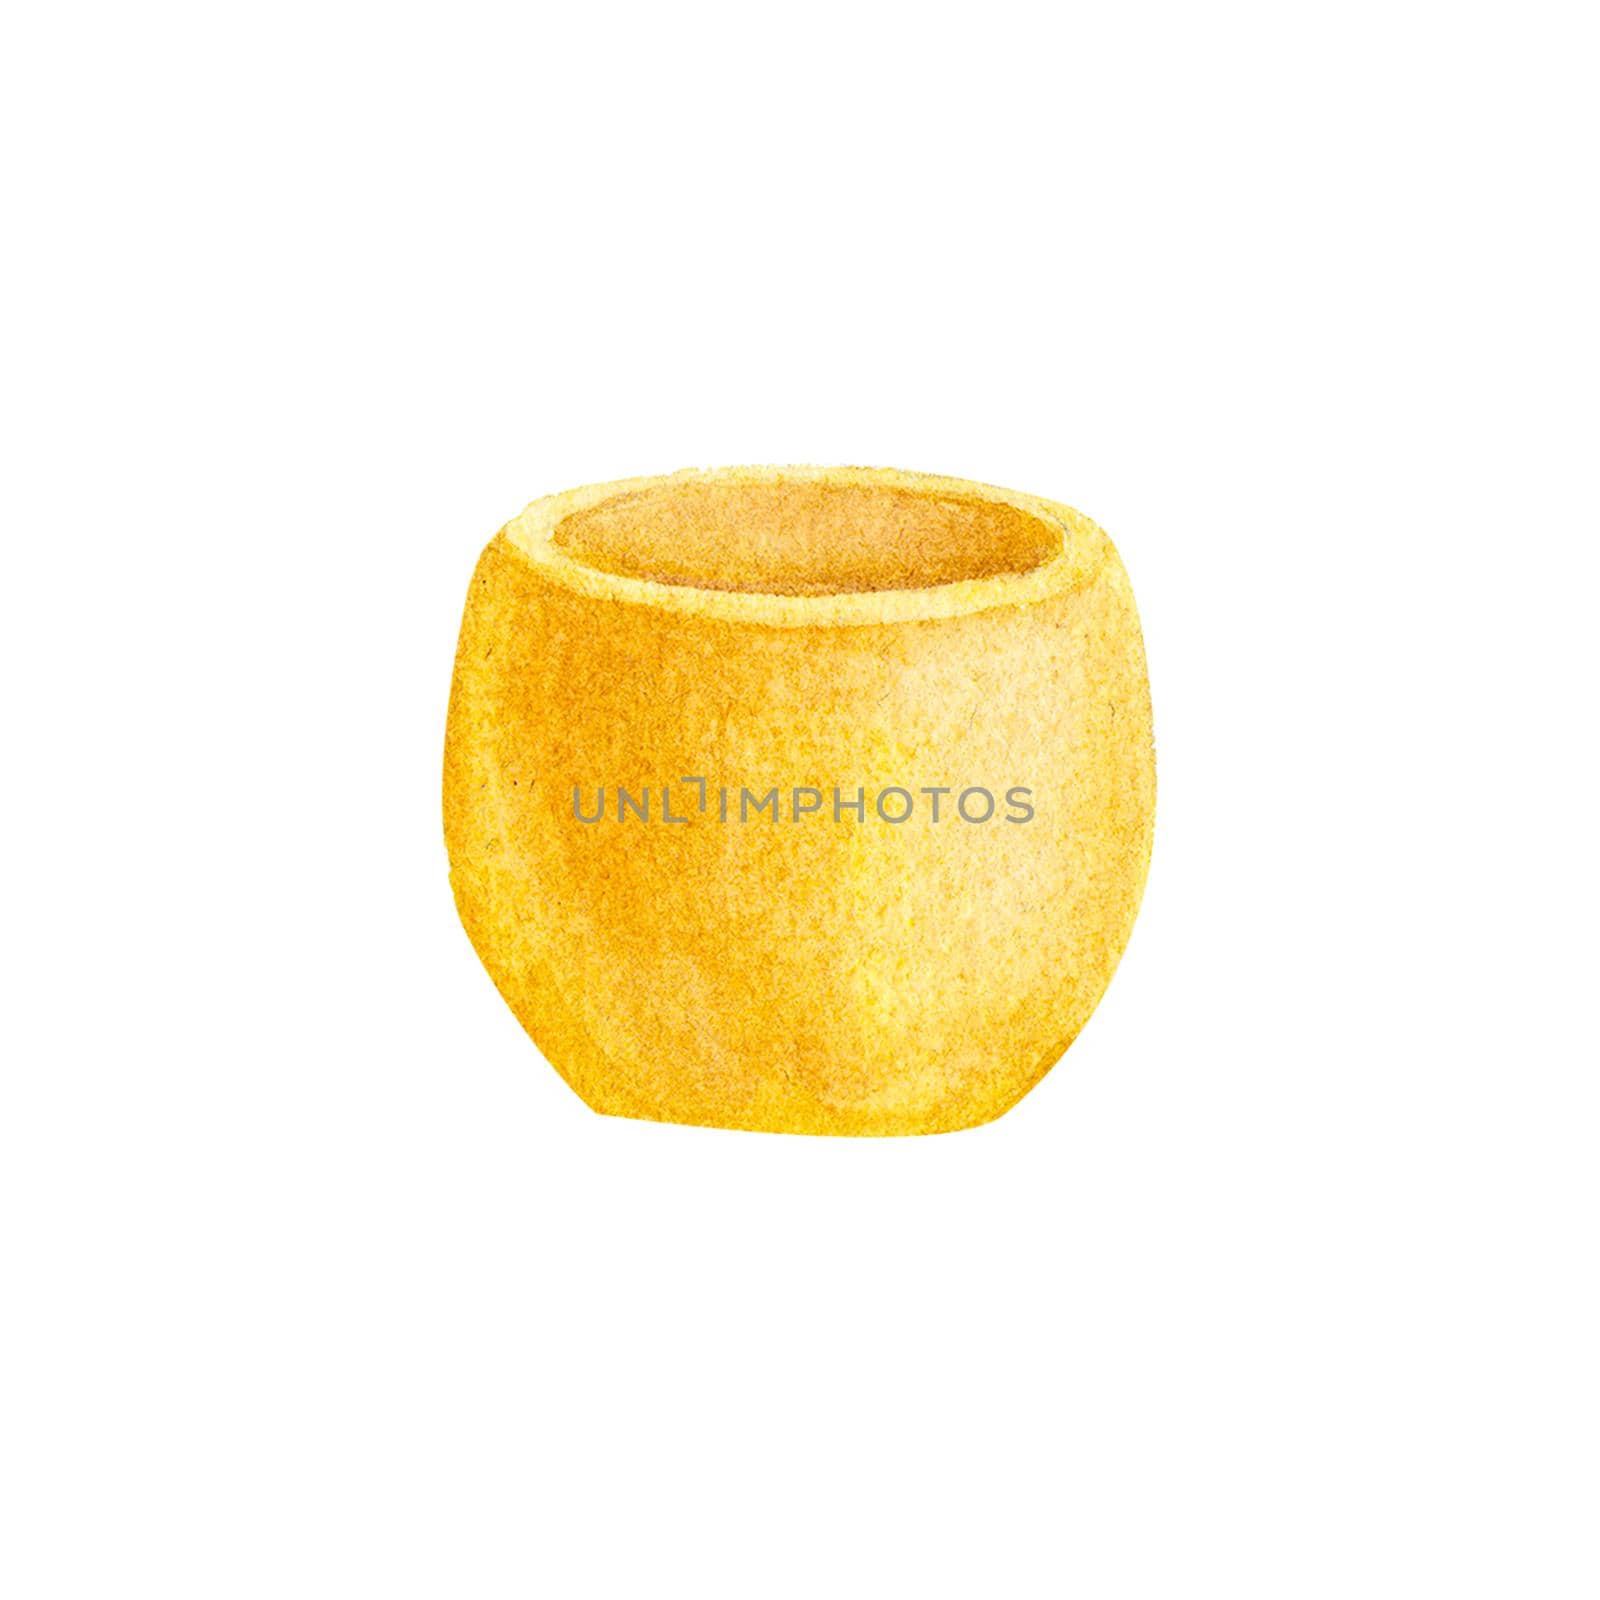 Flower pot on a white background. Watercolor illustration. The pot is yellow. Garden Item. Decorative pot perfect for print, poster, card making and scrapbooking design.